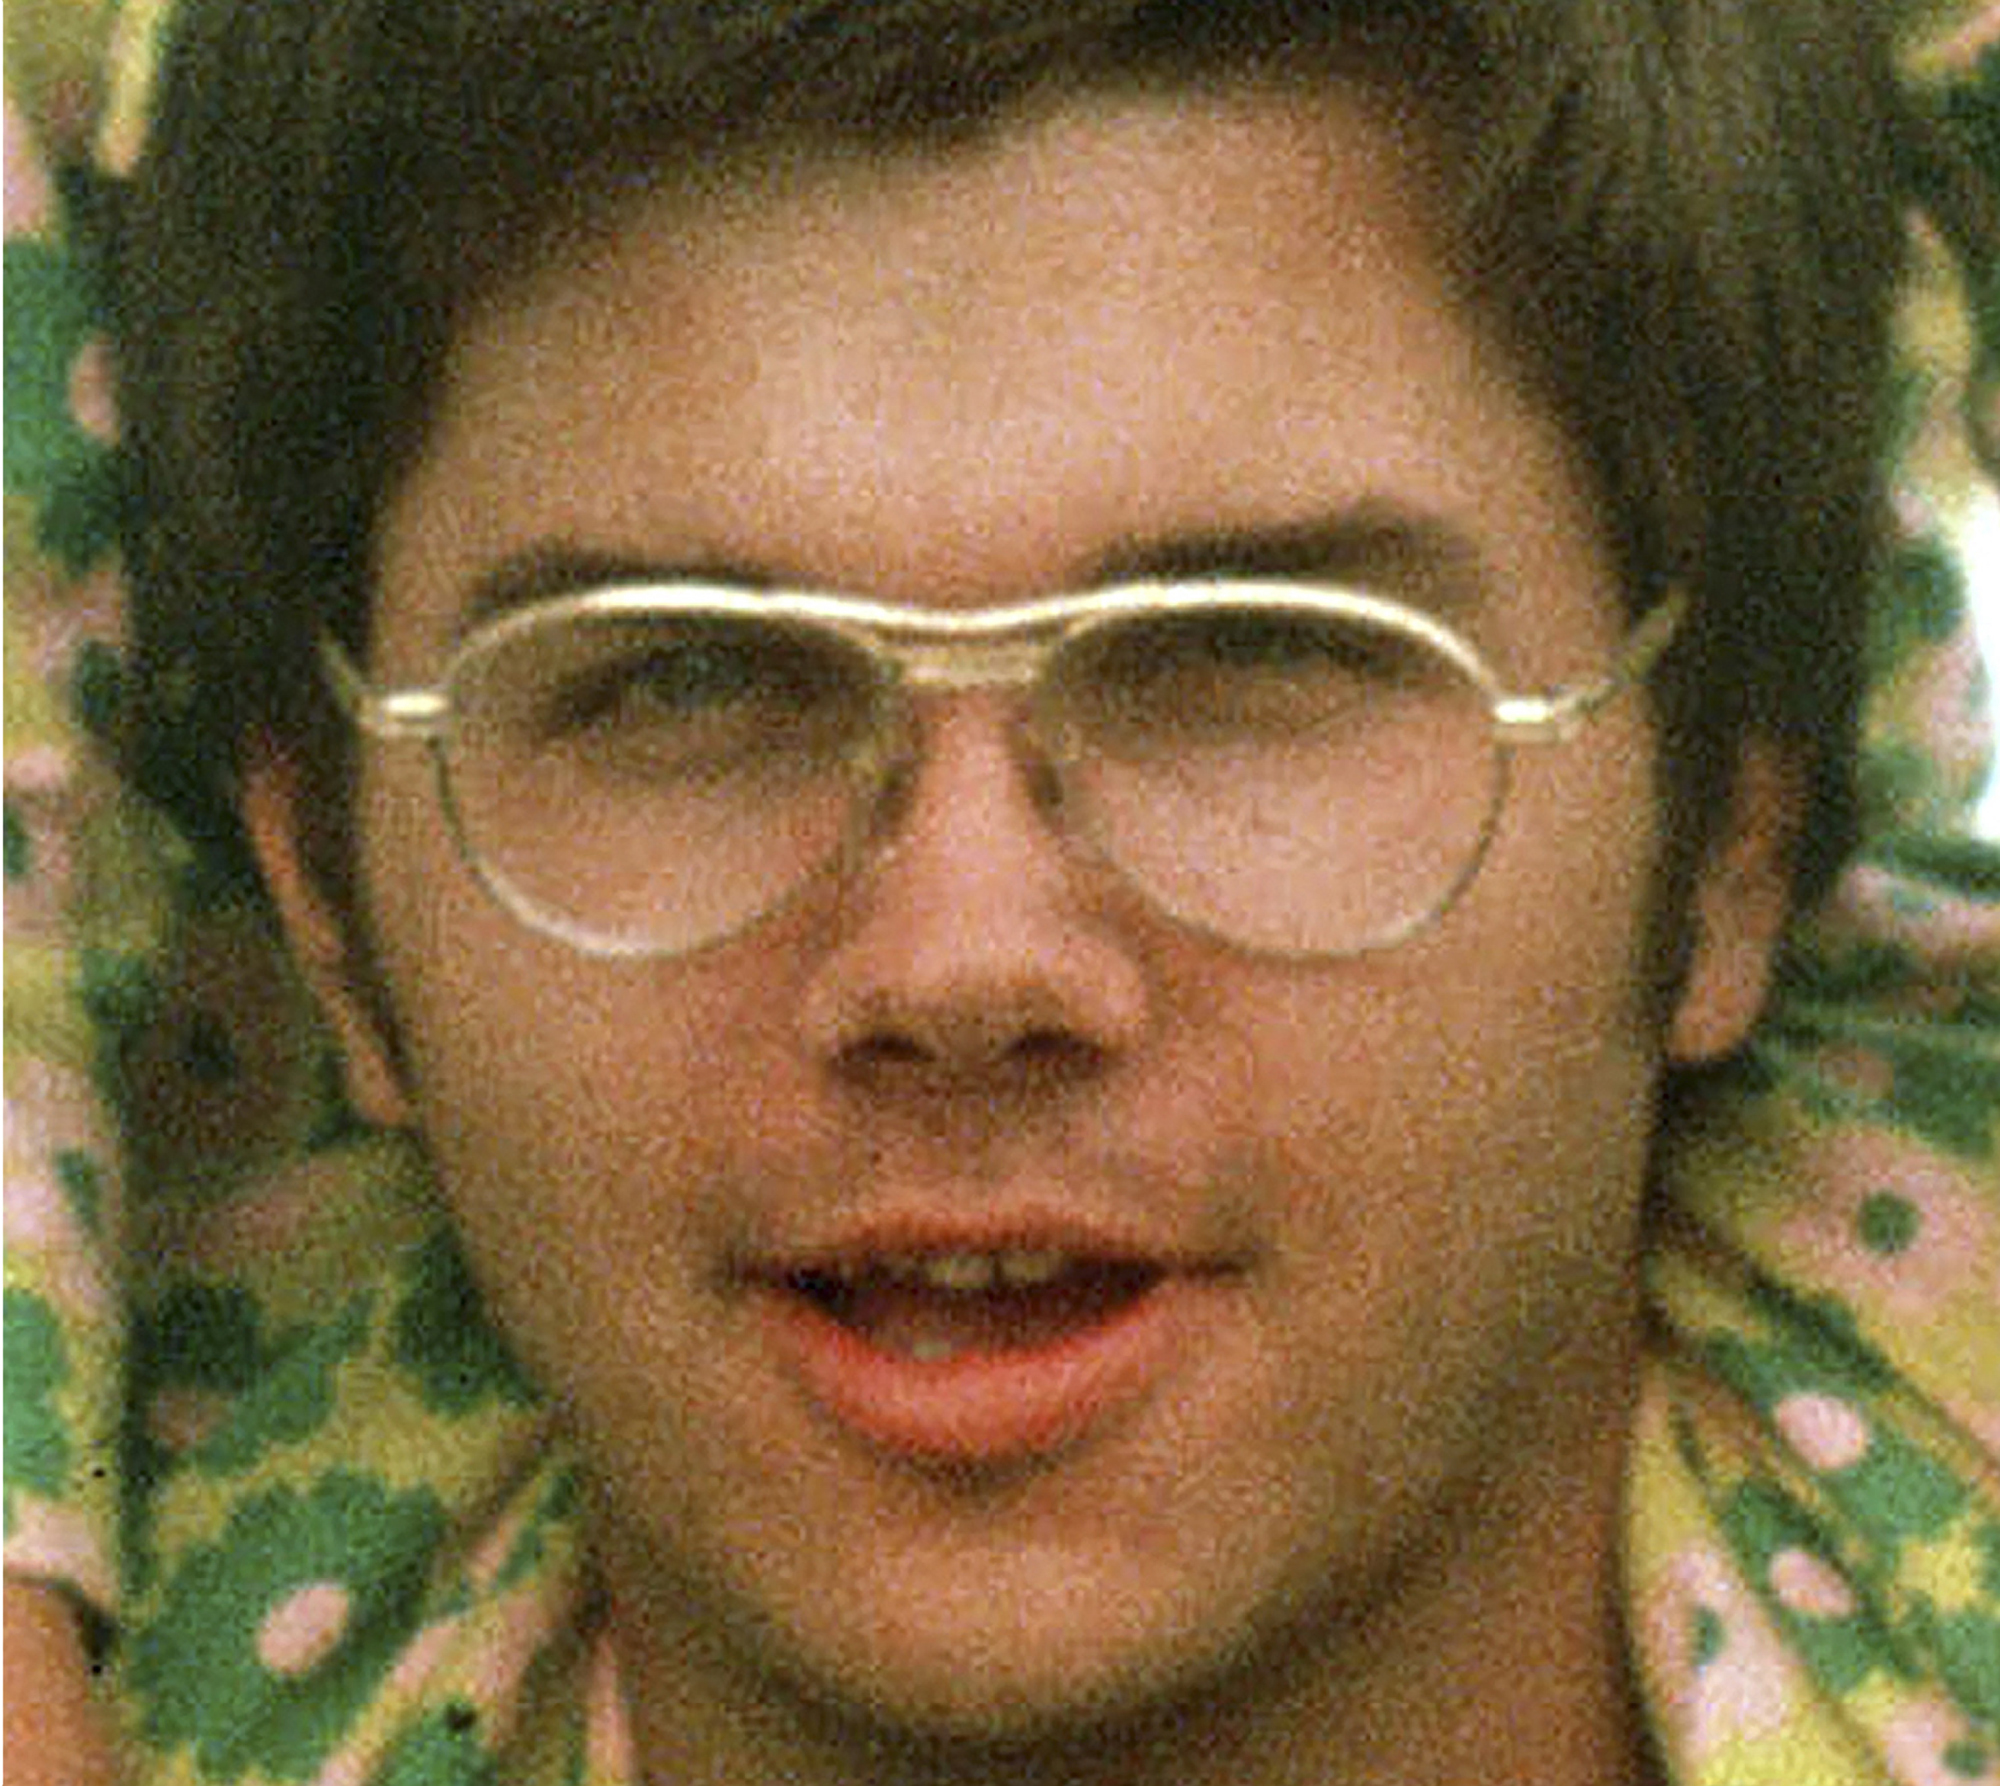 In this 1975 file photo, Mark David Chapman is seen at Fort Chaffee near Fort Smith, Ark. The New York state Board of Parole on Monday,  Aug. 29, 2016, announced that it has again denied parole to Chapman, who on Dec. 8, 1980, shot and killed John Lennon (Greg Lyuan—AP)